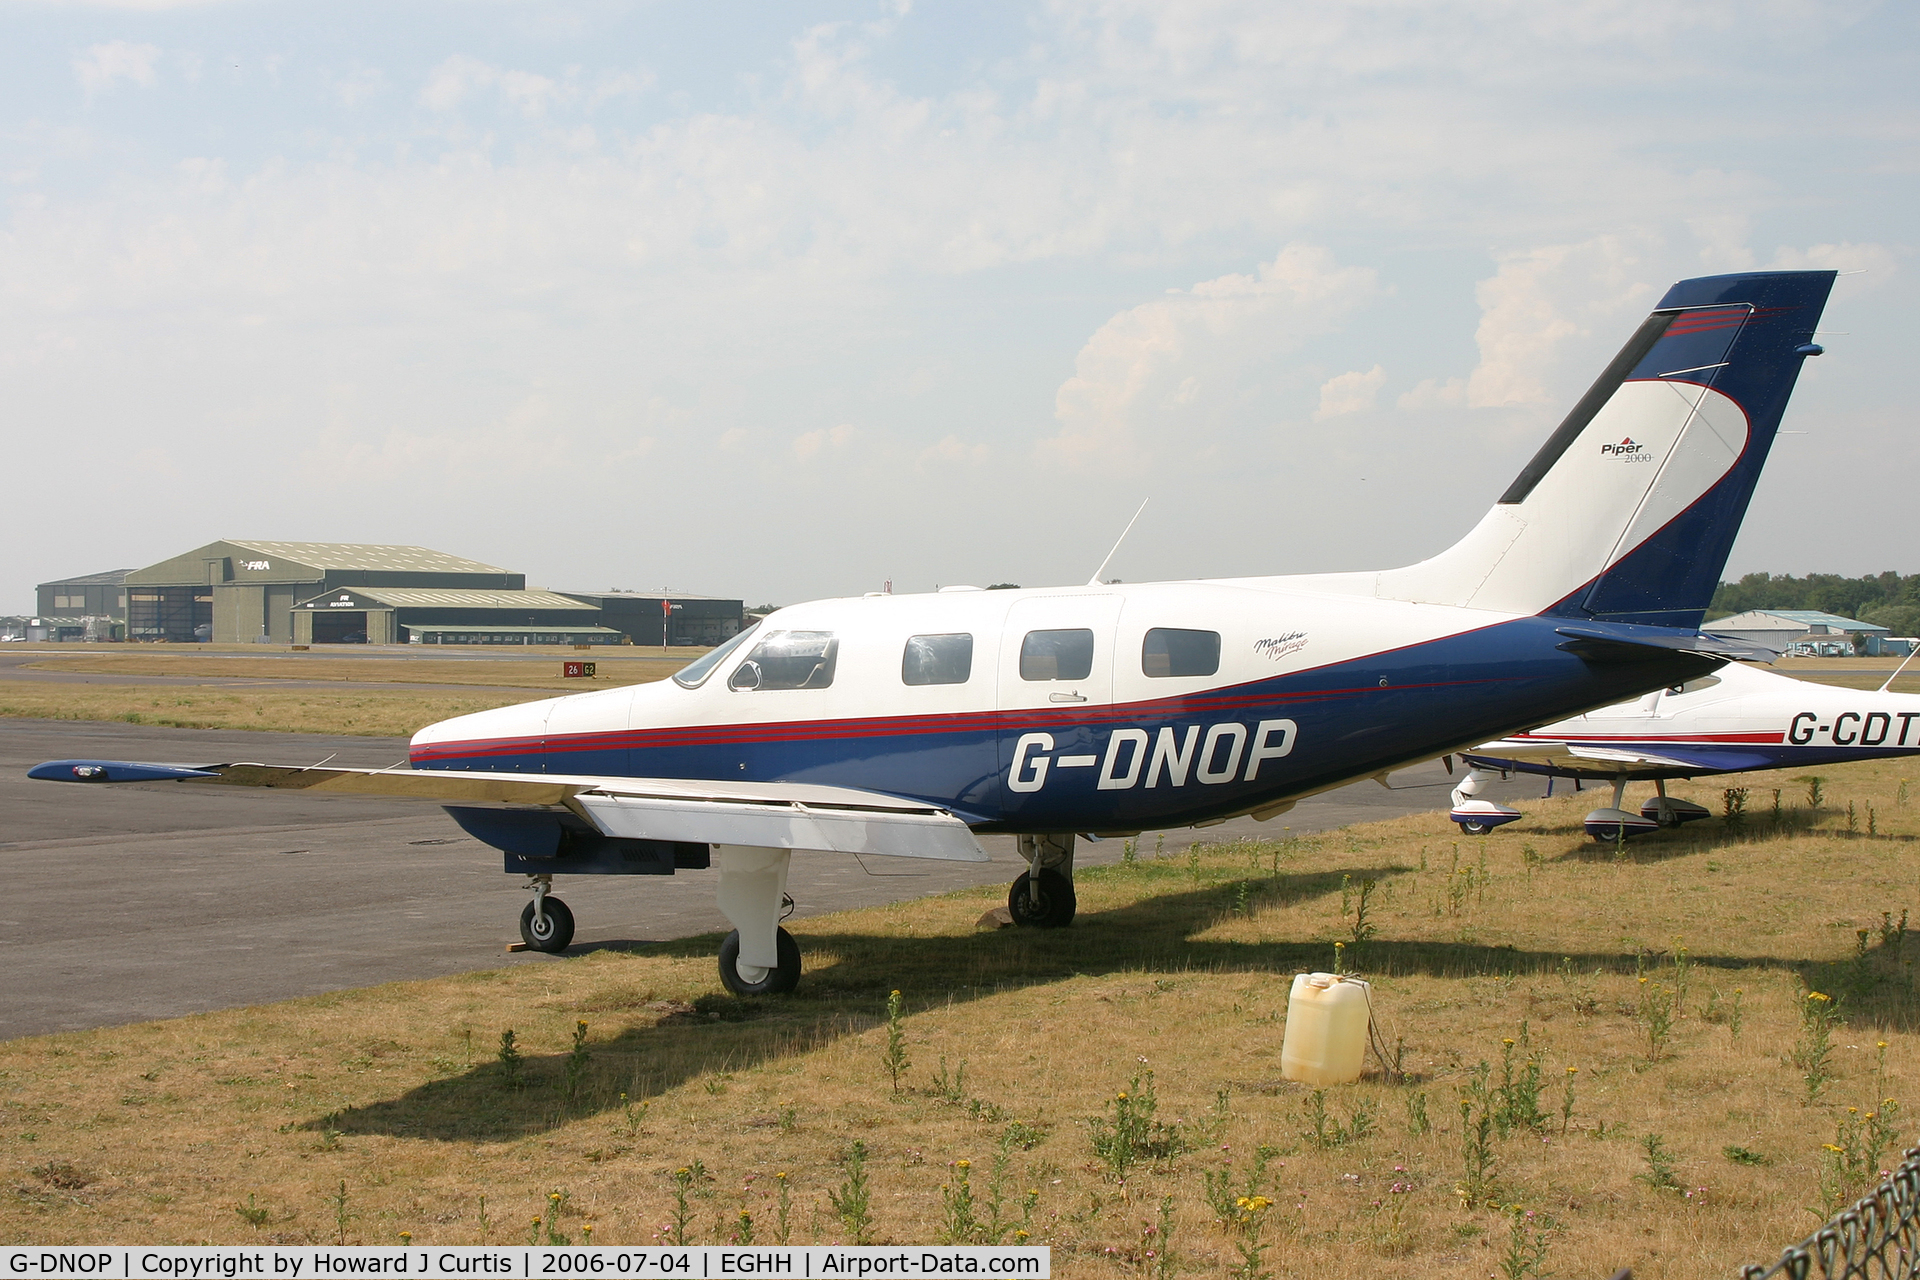 G-DNOP, 2000 Piper PA-46-350P Malibu Mirage C/N 4636303, Parked outside, minus engine.